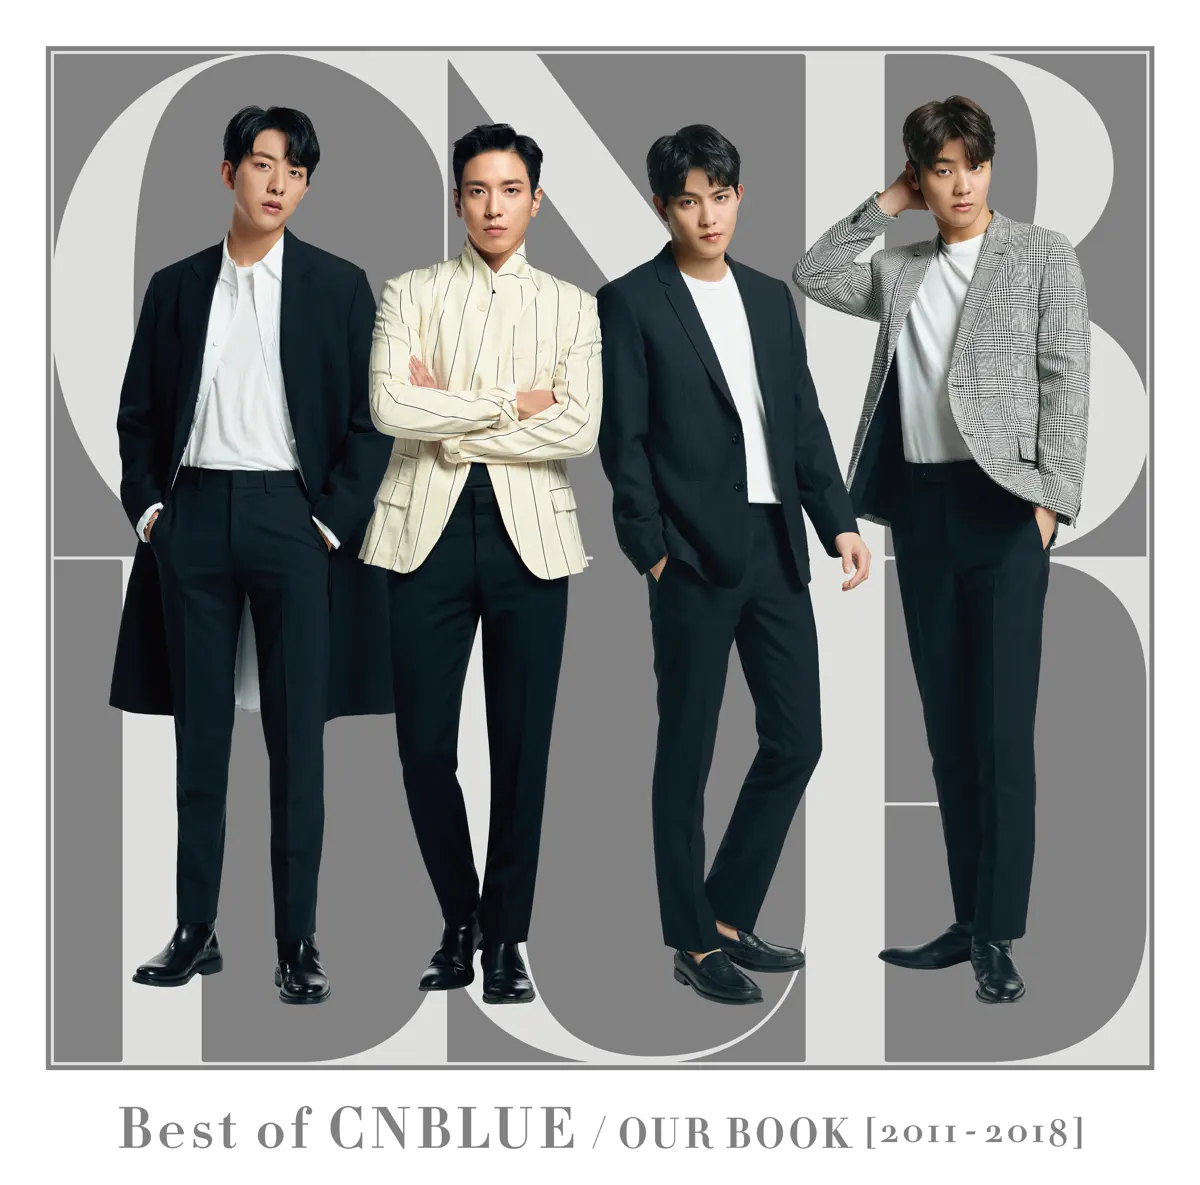 CNBLUE - Best of CNBLUE / OUR BOOK (2011-2018) (2018) [iTunes Plus AAC M4A]-新房子